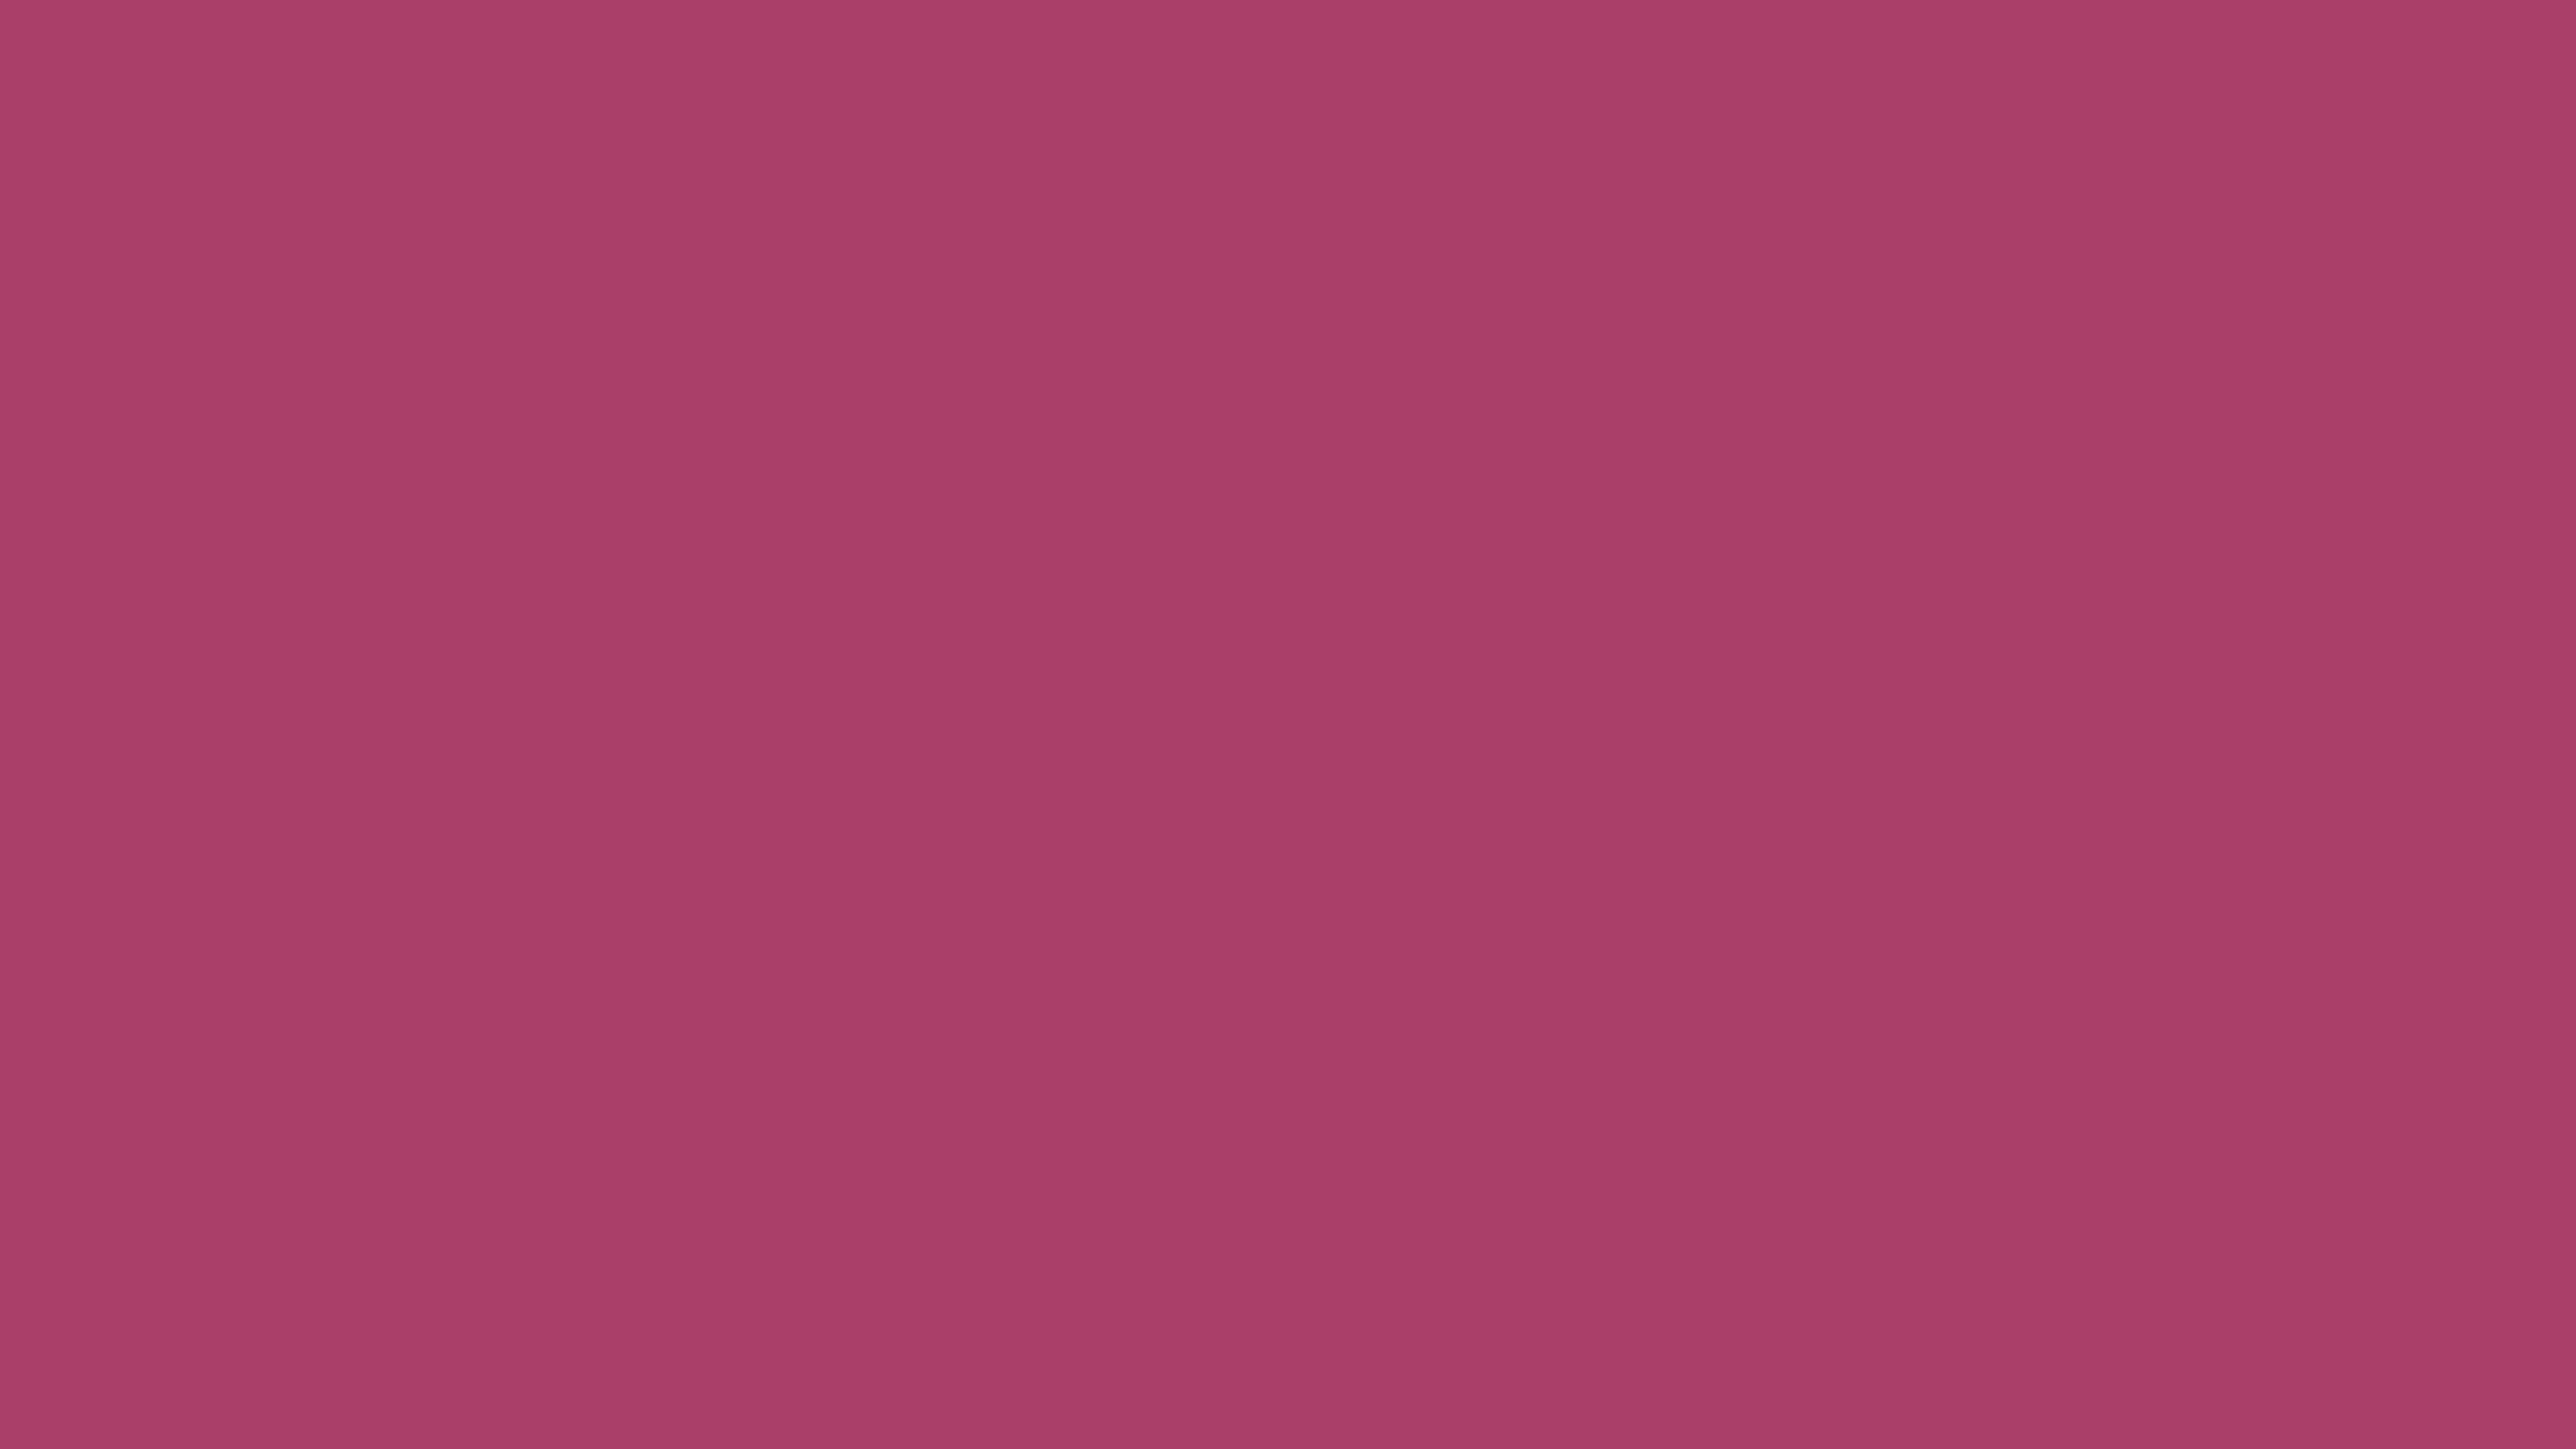 5120x2880 Medium Ruby Solid Color Background